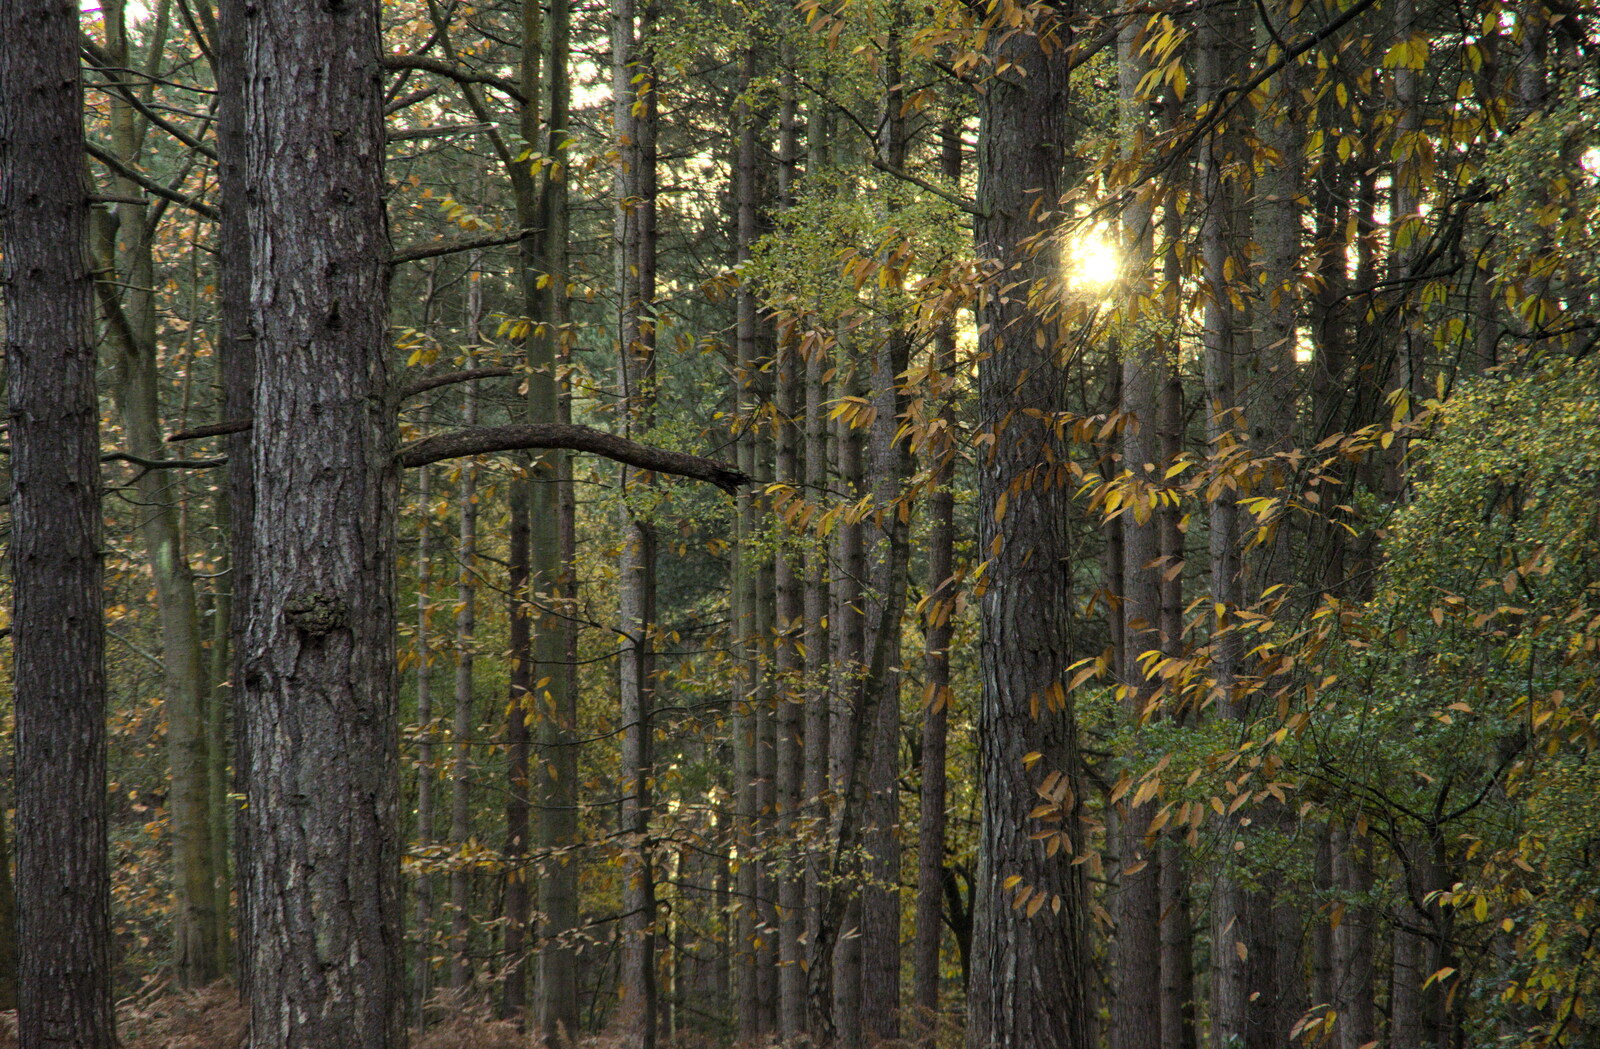 Sunlight through the trees from A Trip to Sandringham Estate, Norfolk - 31st October 2020